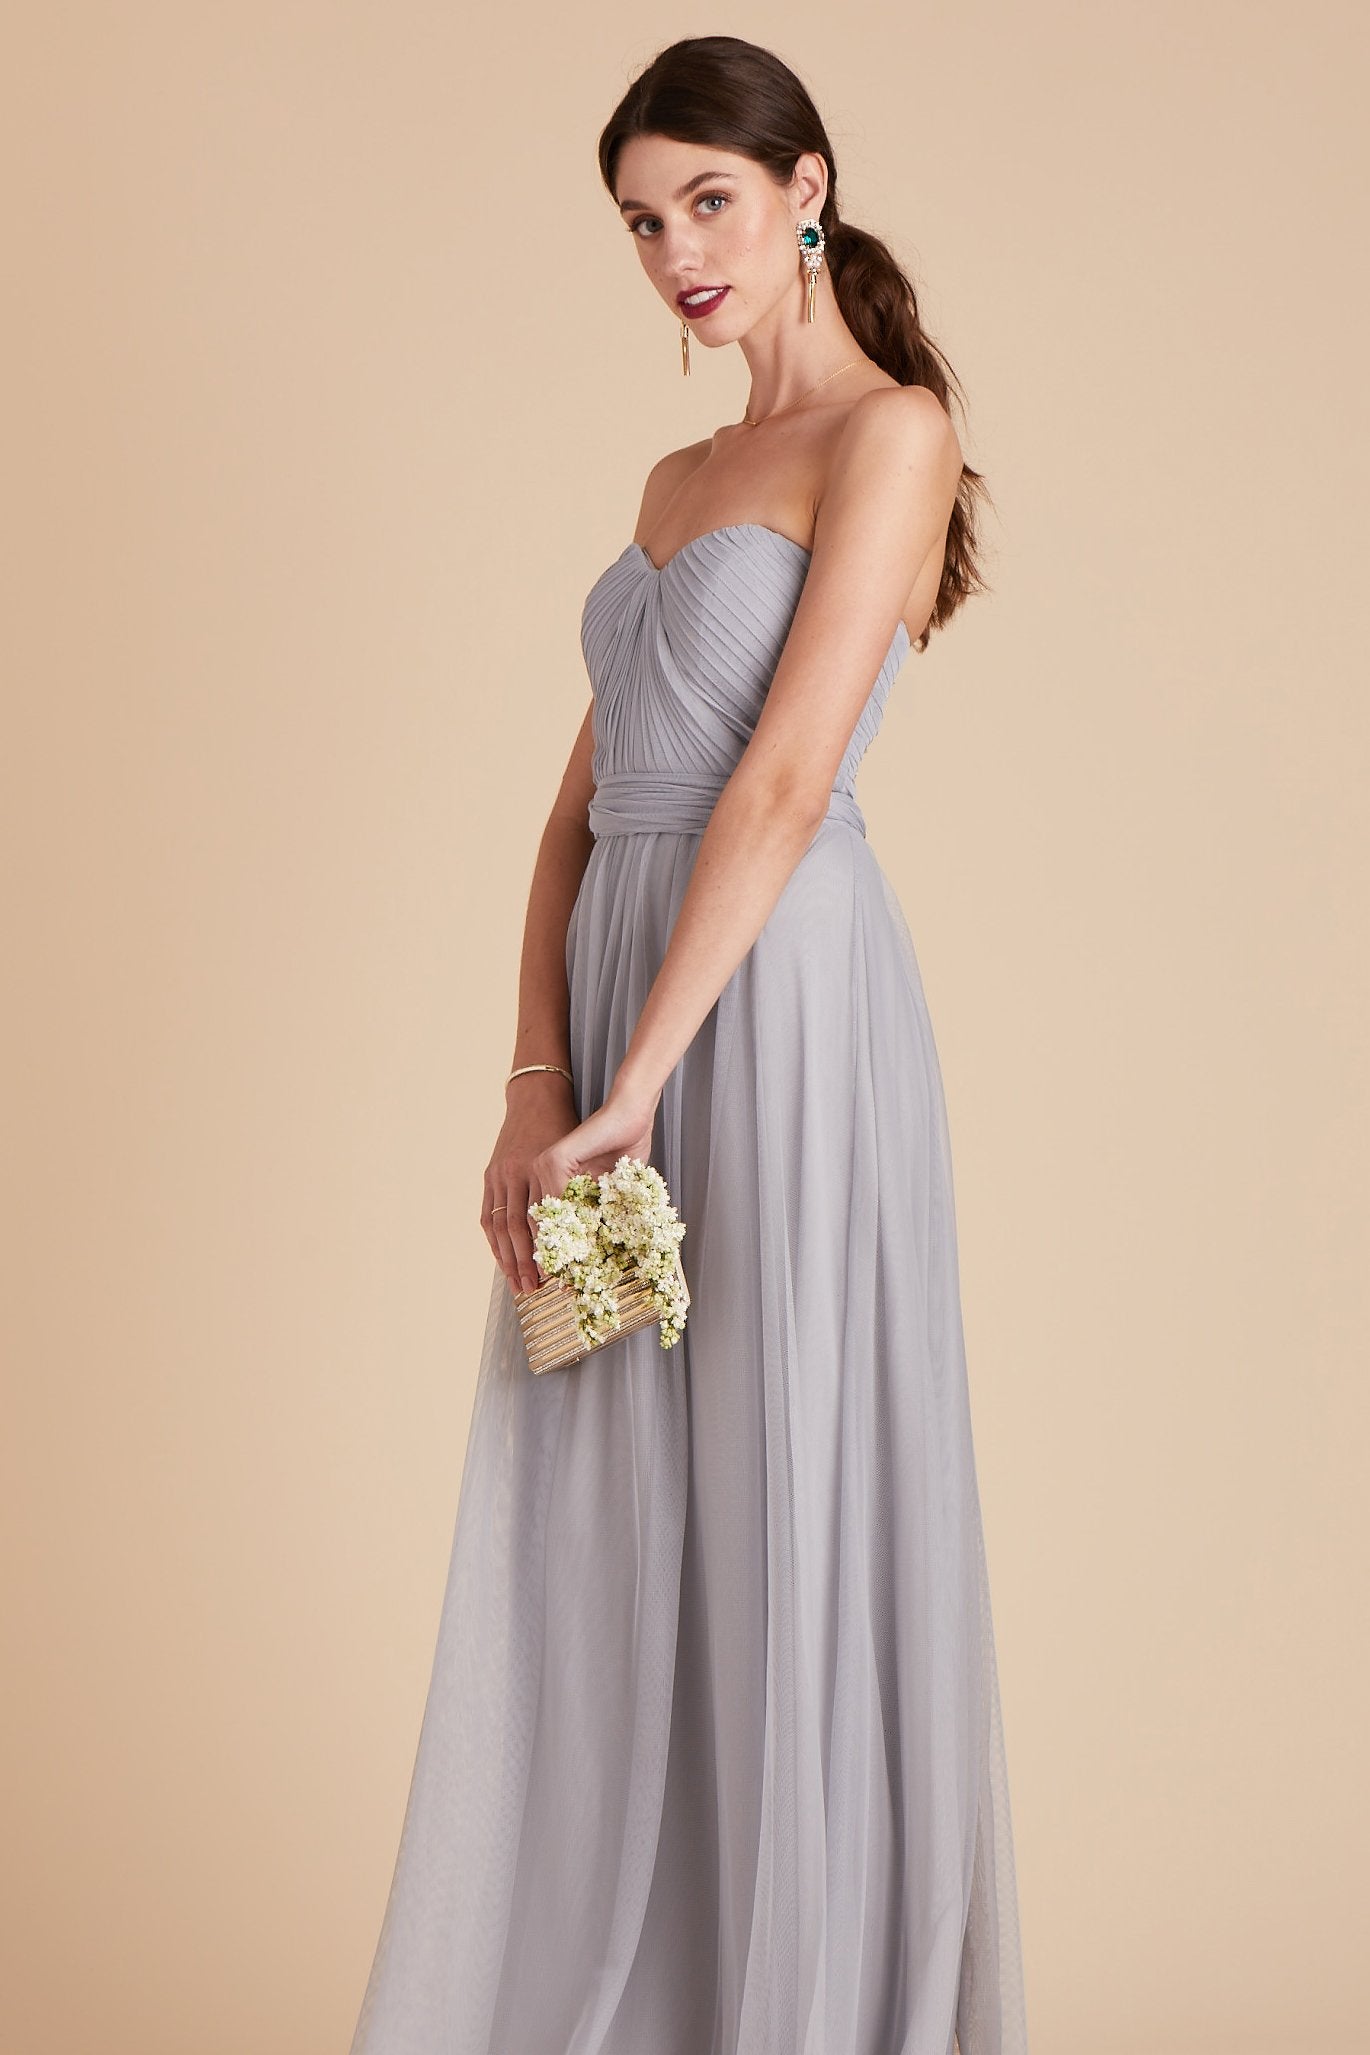 Christina convertible bridesmaid dress in silver tulle by Birdy Grey, side view